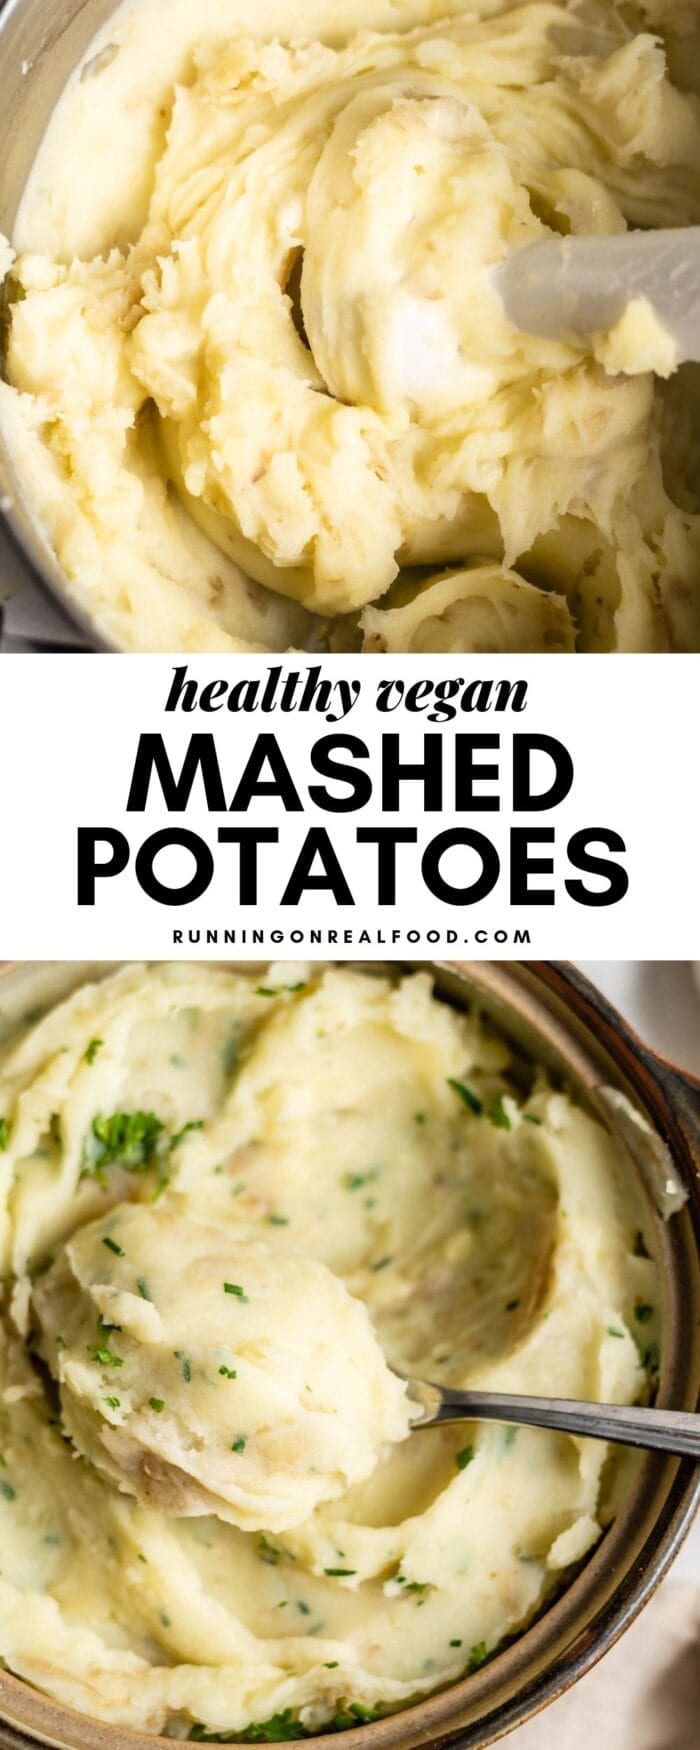 Pinterest image collage showing two photos of mashed potatoes with a text overlay.